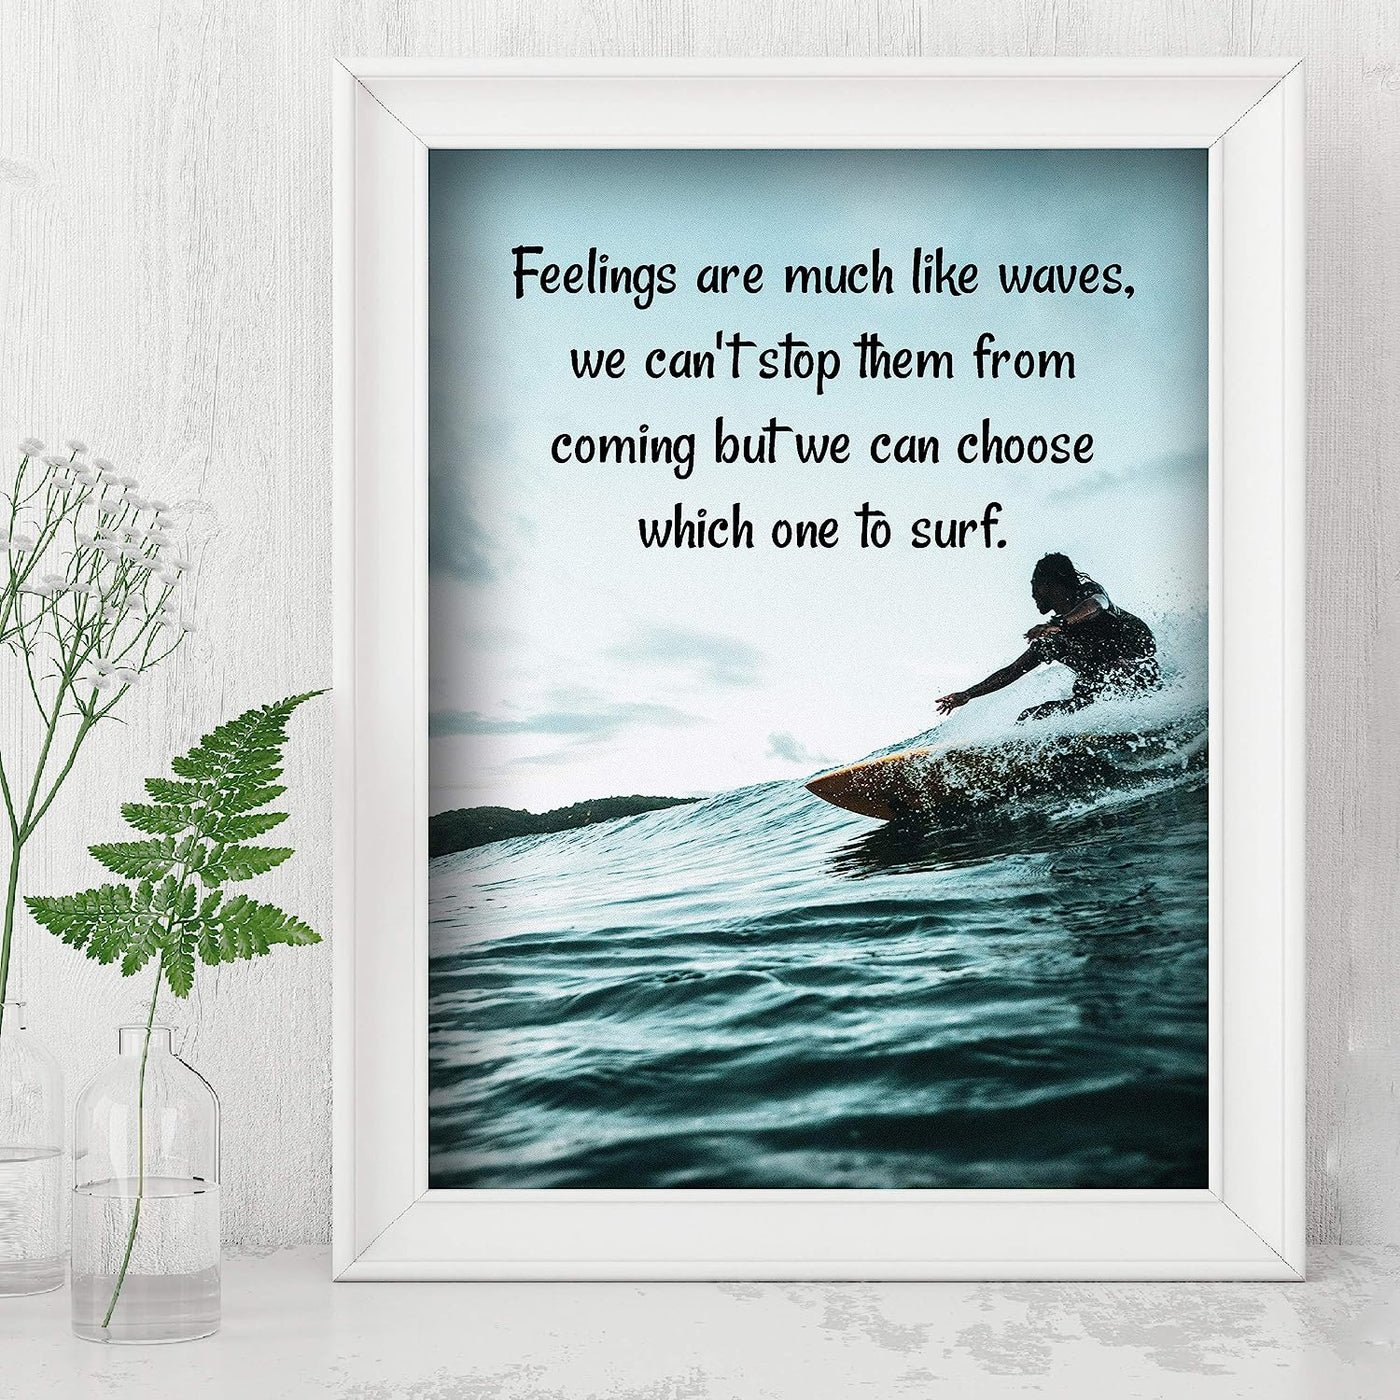 Feelings Are Like Waves-Choose Which One to Surf Beach Poster Print-8x10" Inspirational Quotes Wall Art-Ready to Frame. Home-Office-Ocean Theme Decor. Perfect Guest-Beach House Sign! Great Advice!